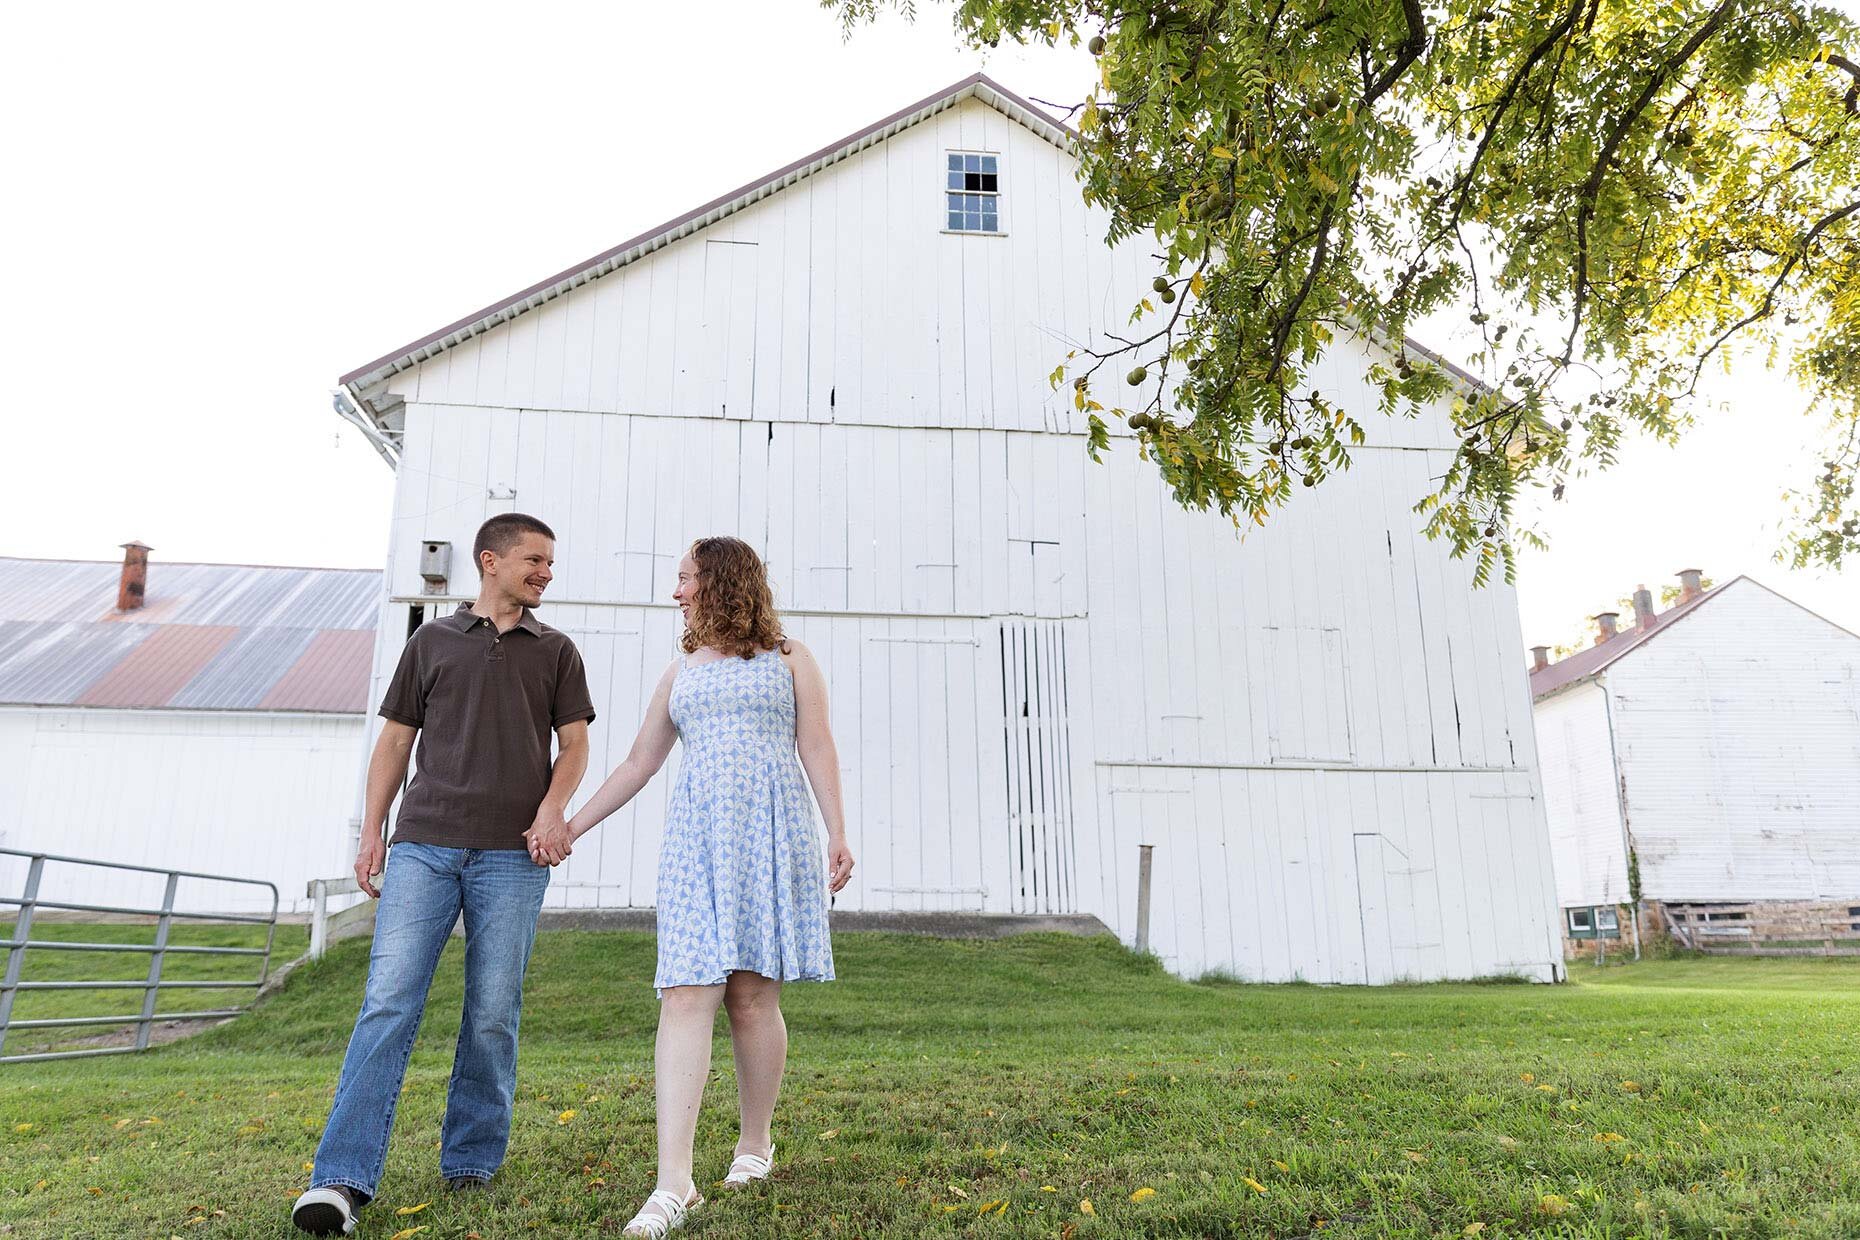 Walking in front of a white barn Engaged